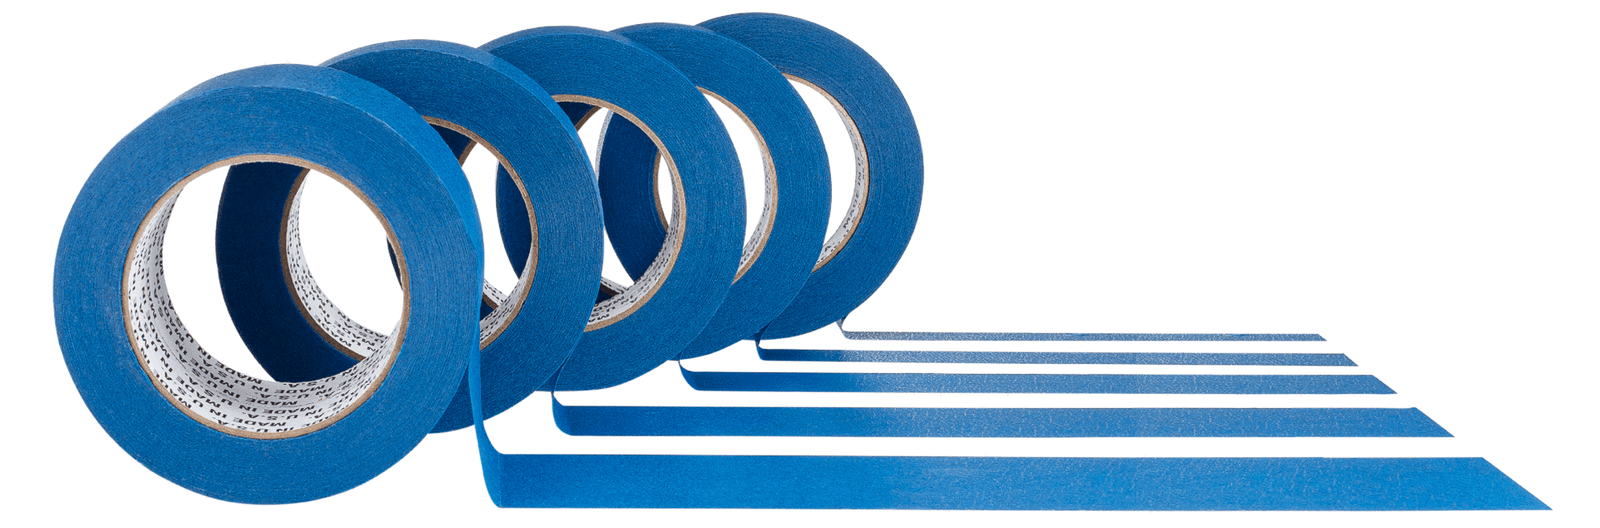 Blue Painter's Tape vs. Masking Tape: What's the Difference?